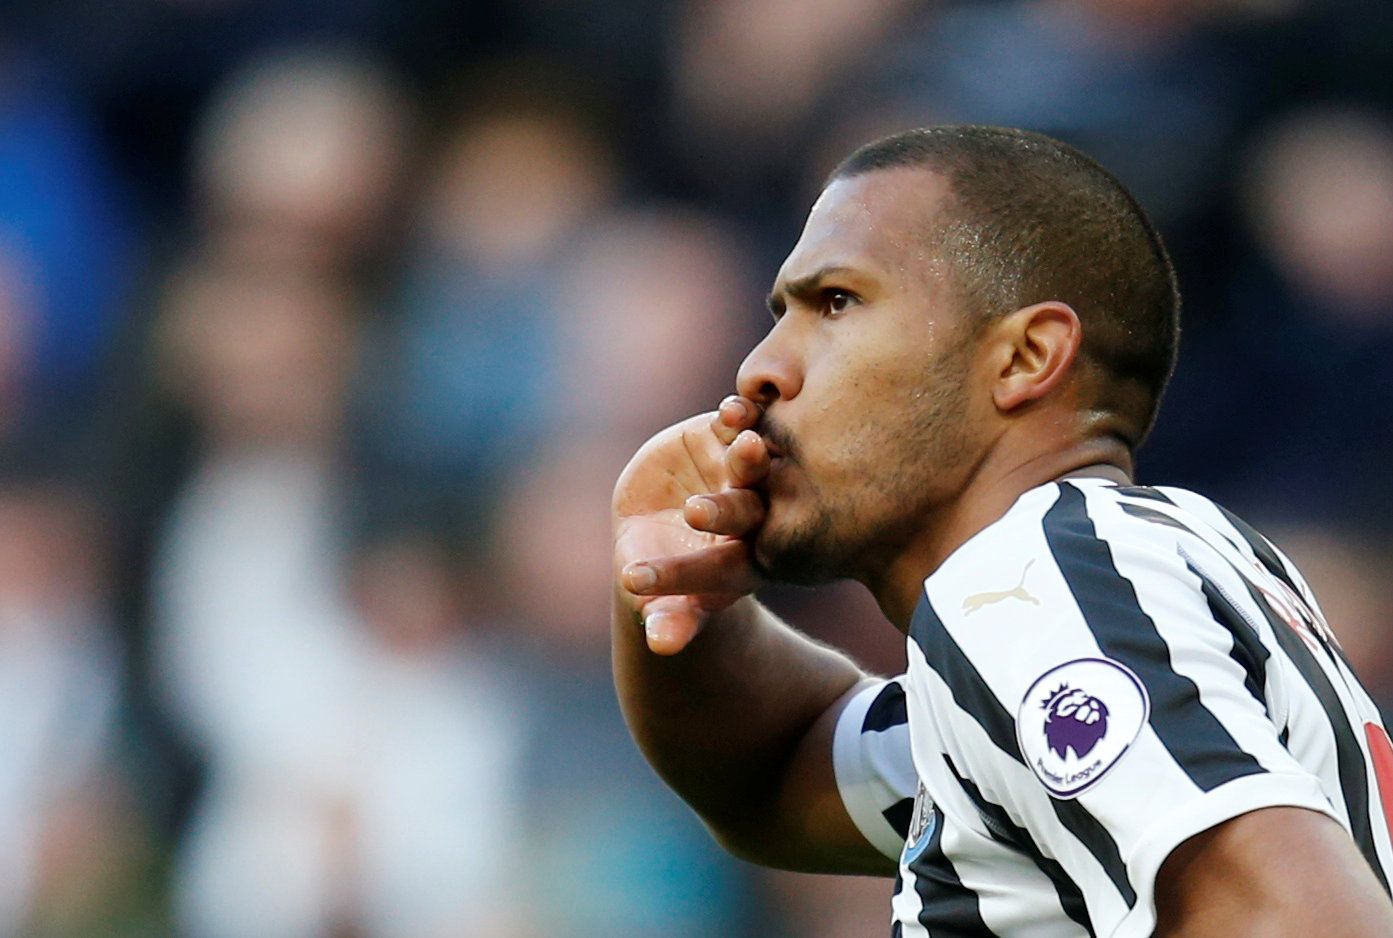 Soccer Football - Premier League - Newcastle United v Everton - St James' Park, Newcastle, Britain - March 9, 2019  Newcastle United's Salomon Rondon celebrates scoring their first goal        Action Images via Reuters/Ed Sykes  EDITORIAL USE ONLY. No use with unauthorized audio, video, data, fixture lists, club/league logos or 